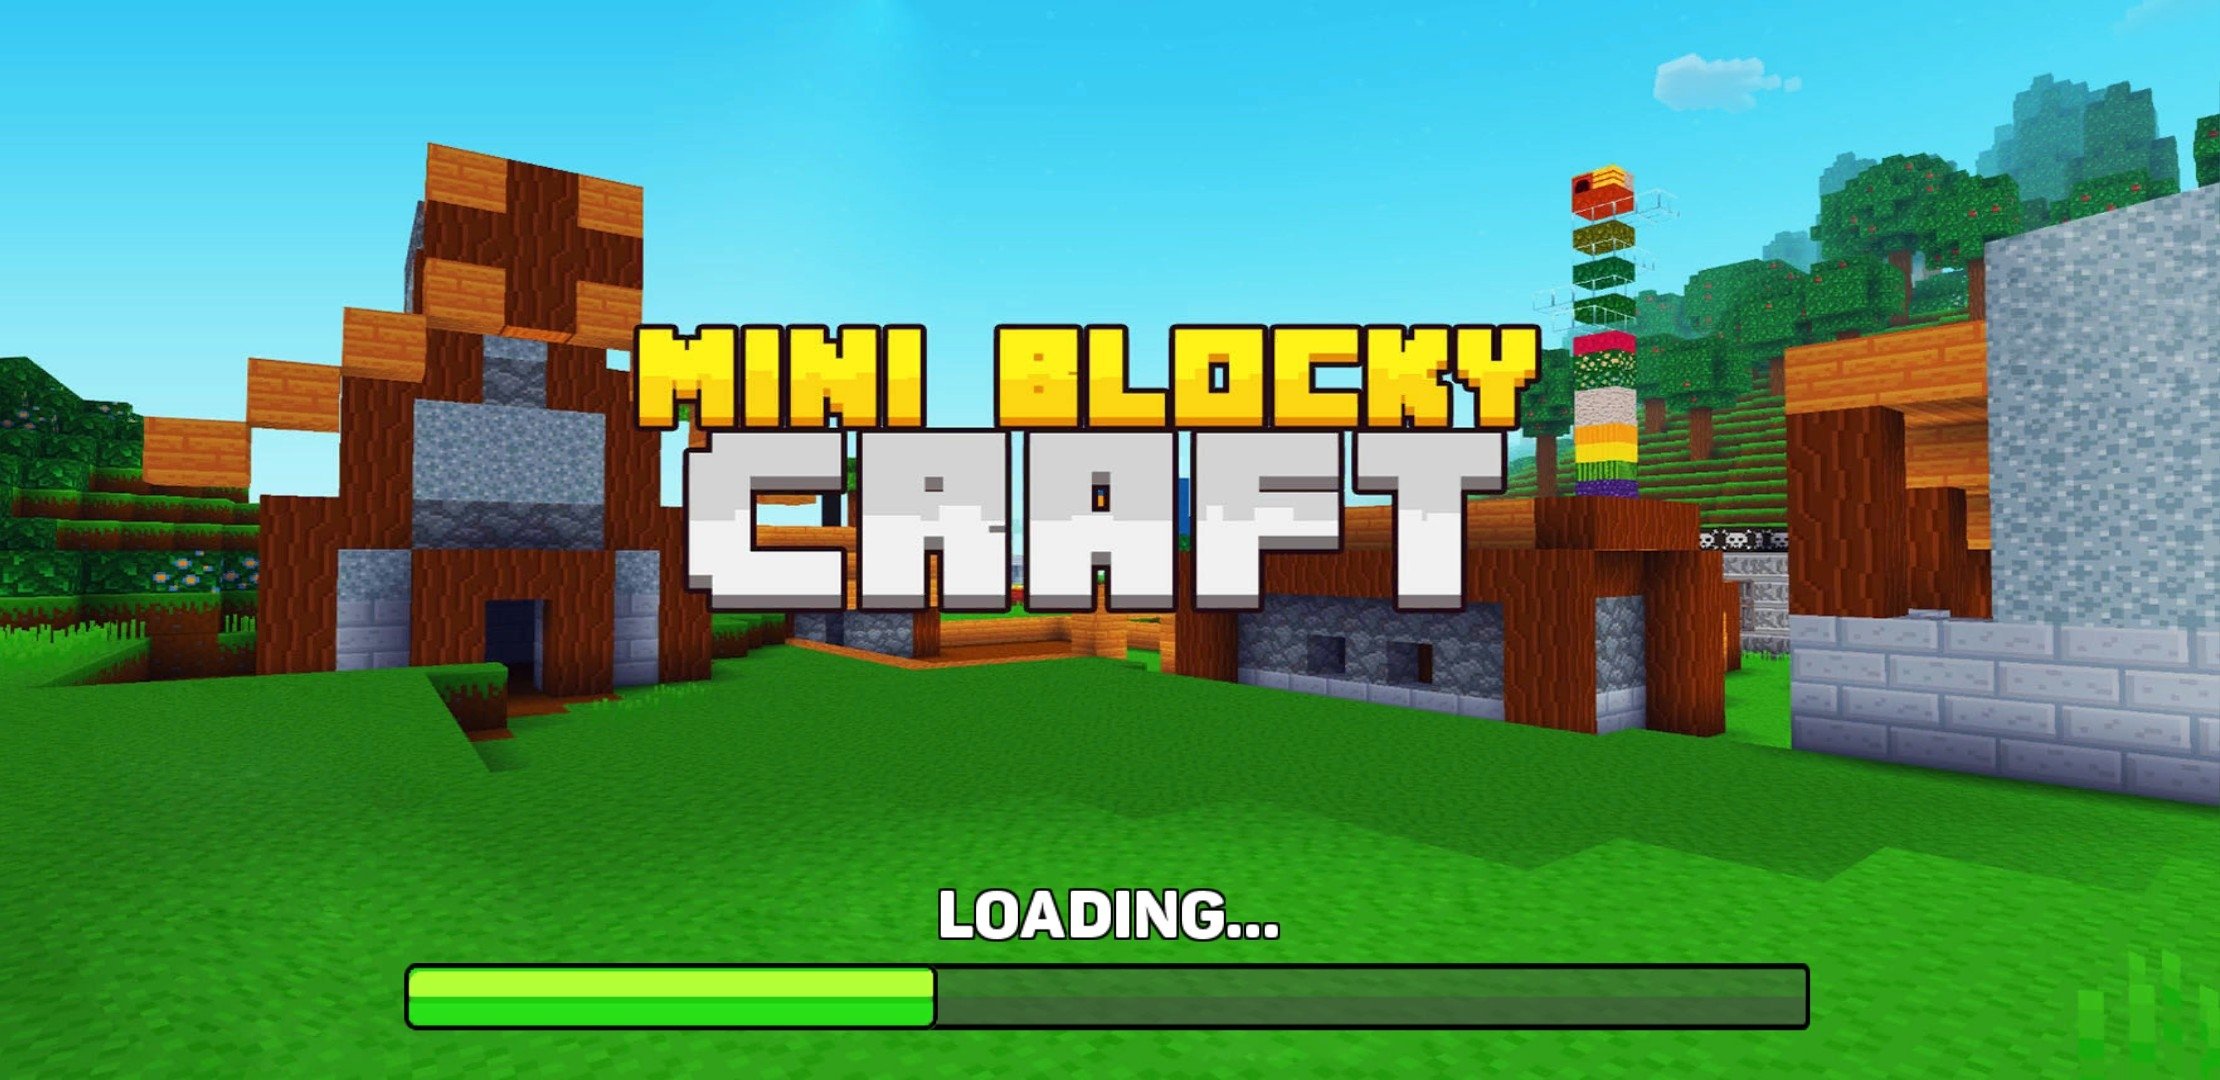 Minicraft 2022 for Android - Download